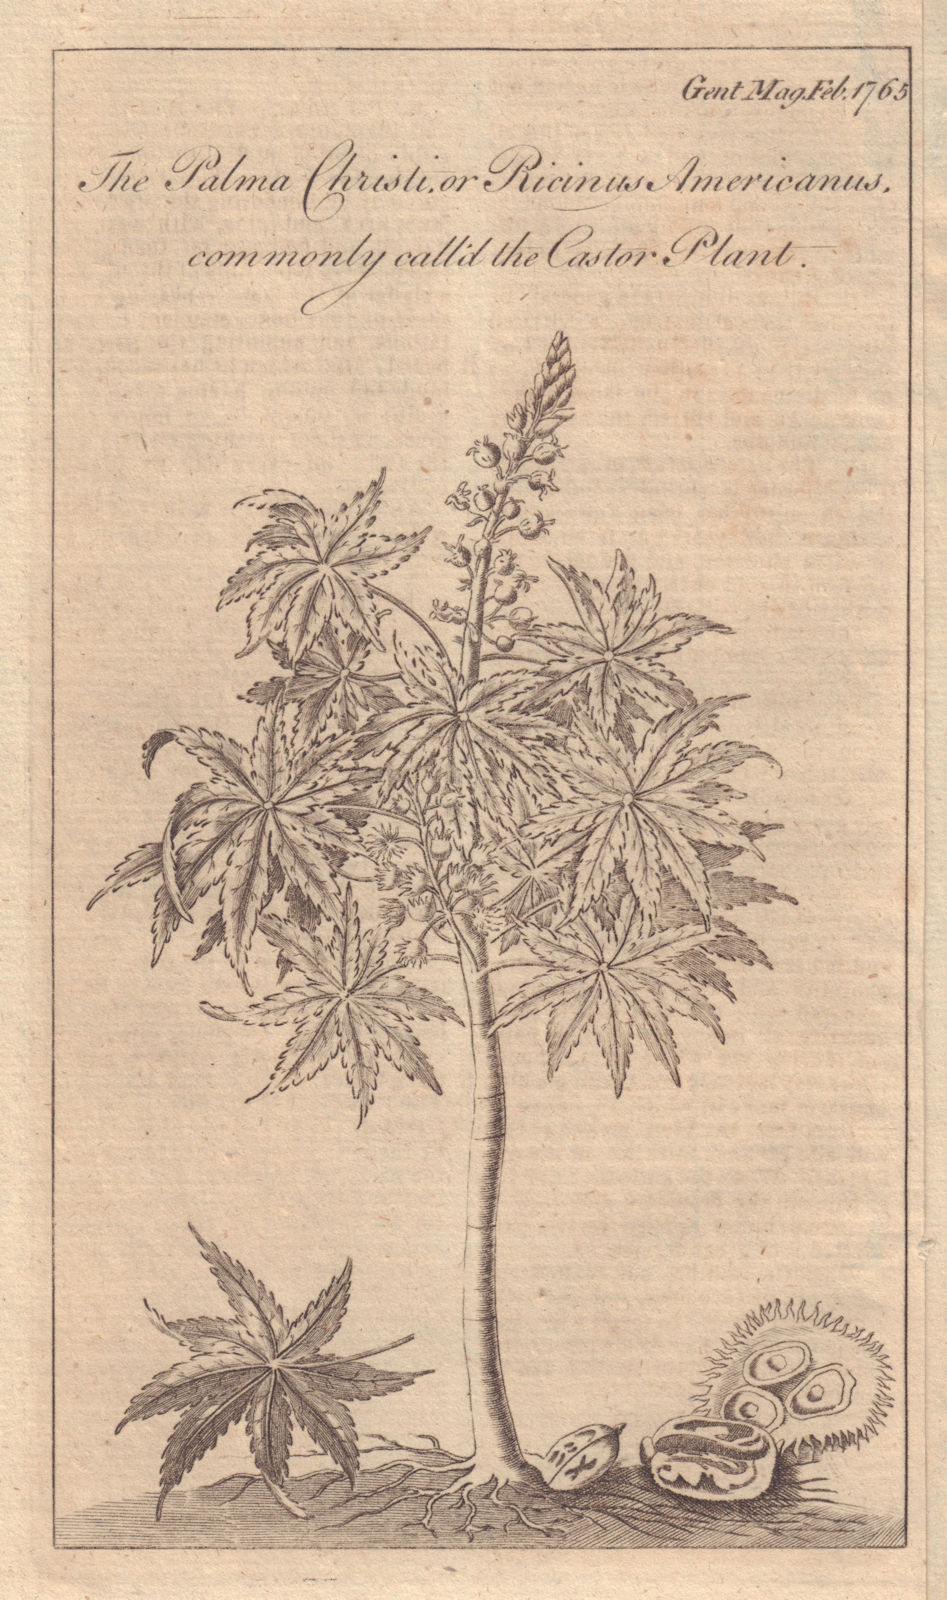 The Palma Christi or Ricinus Americanus commonly called the Castor Plant 1765